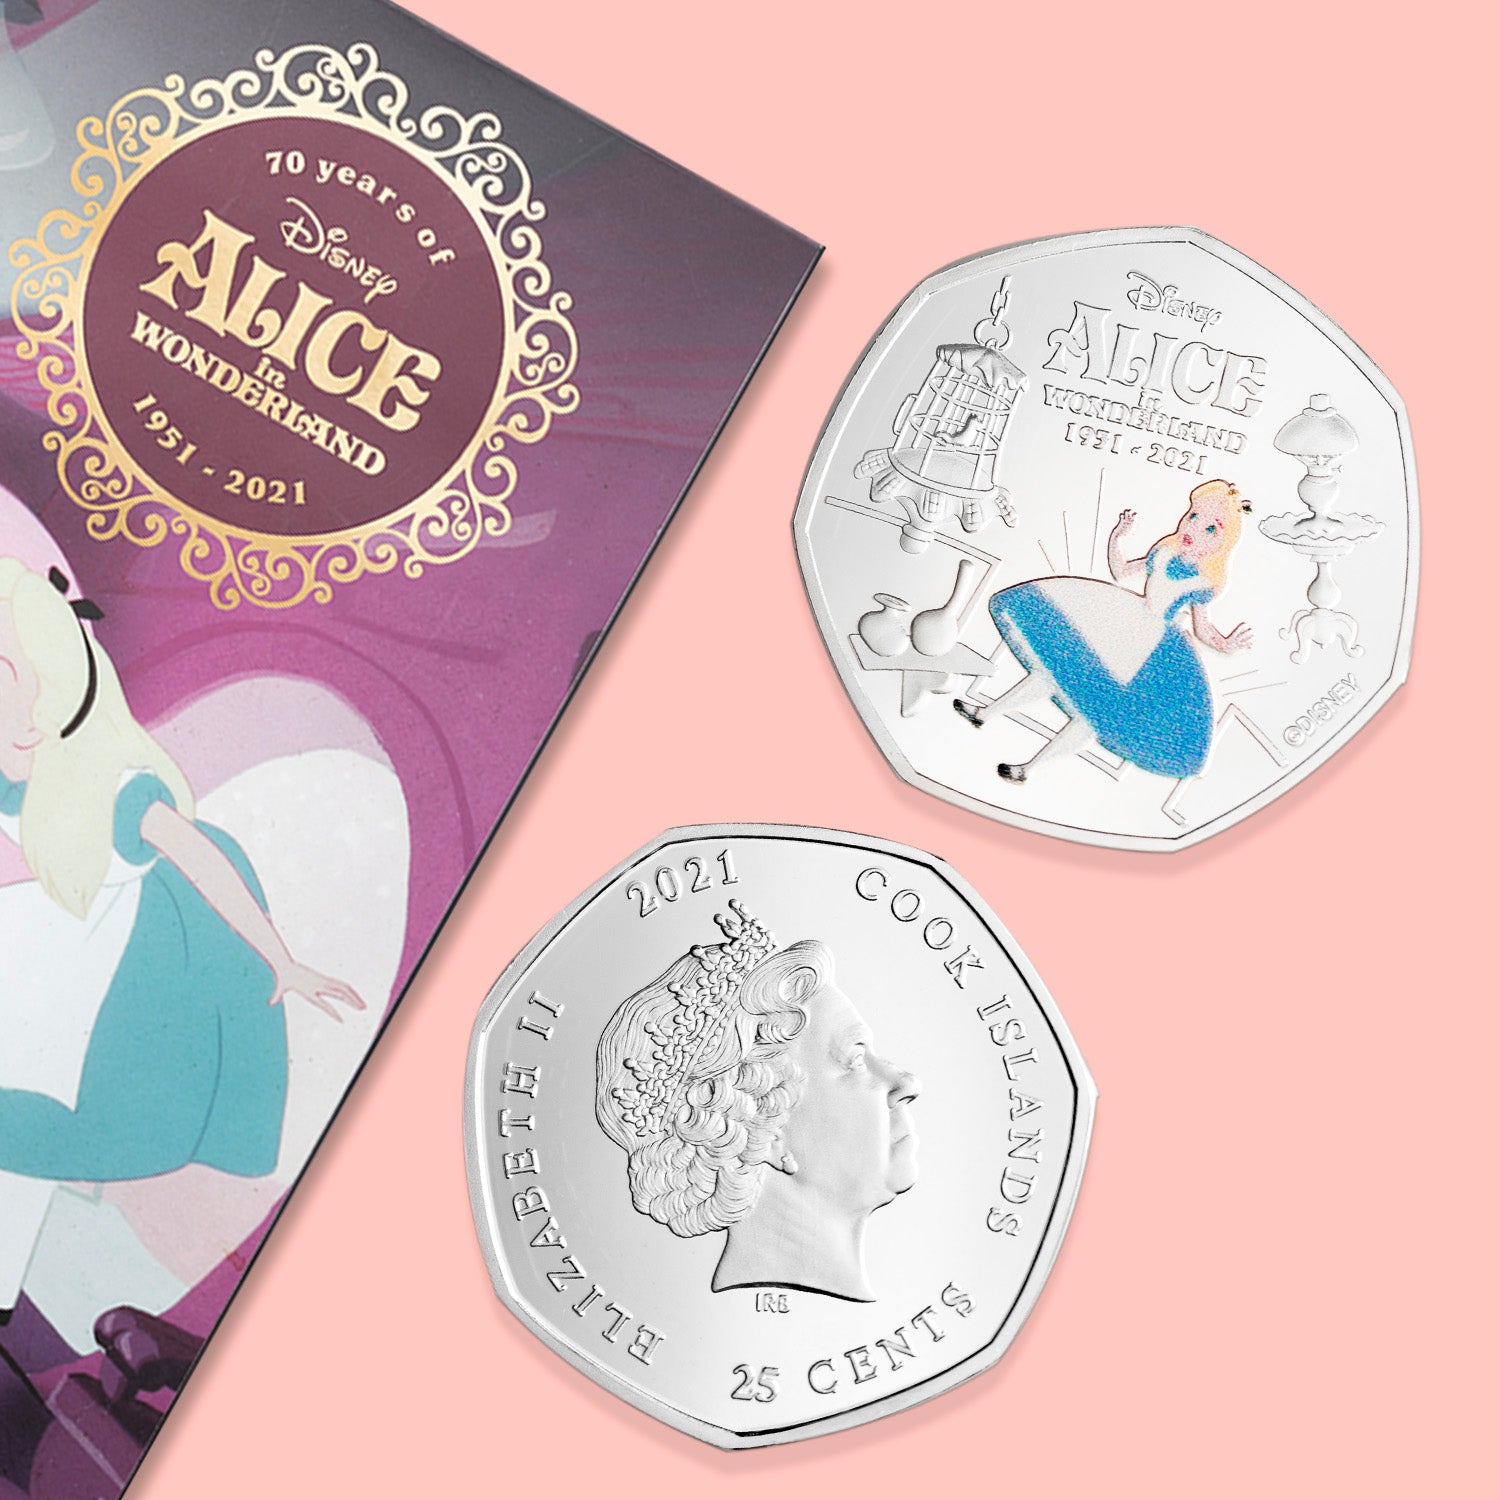 The Disney Alice in Wonderland 70th Anniversary Collection